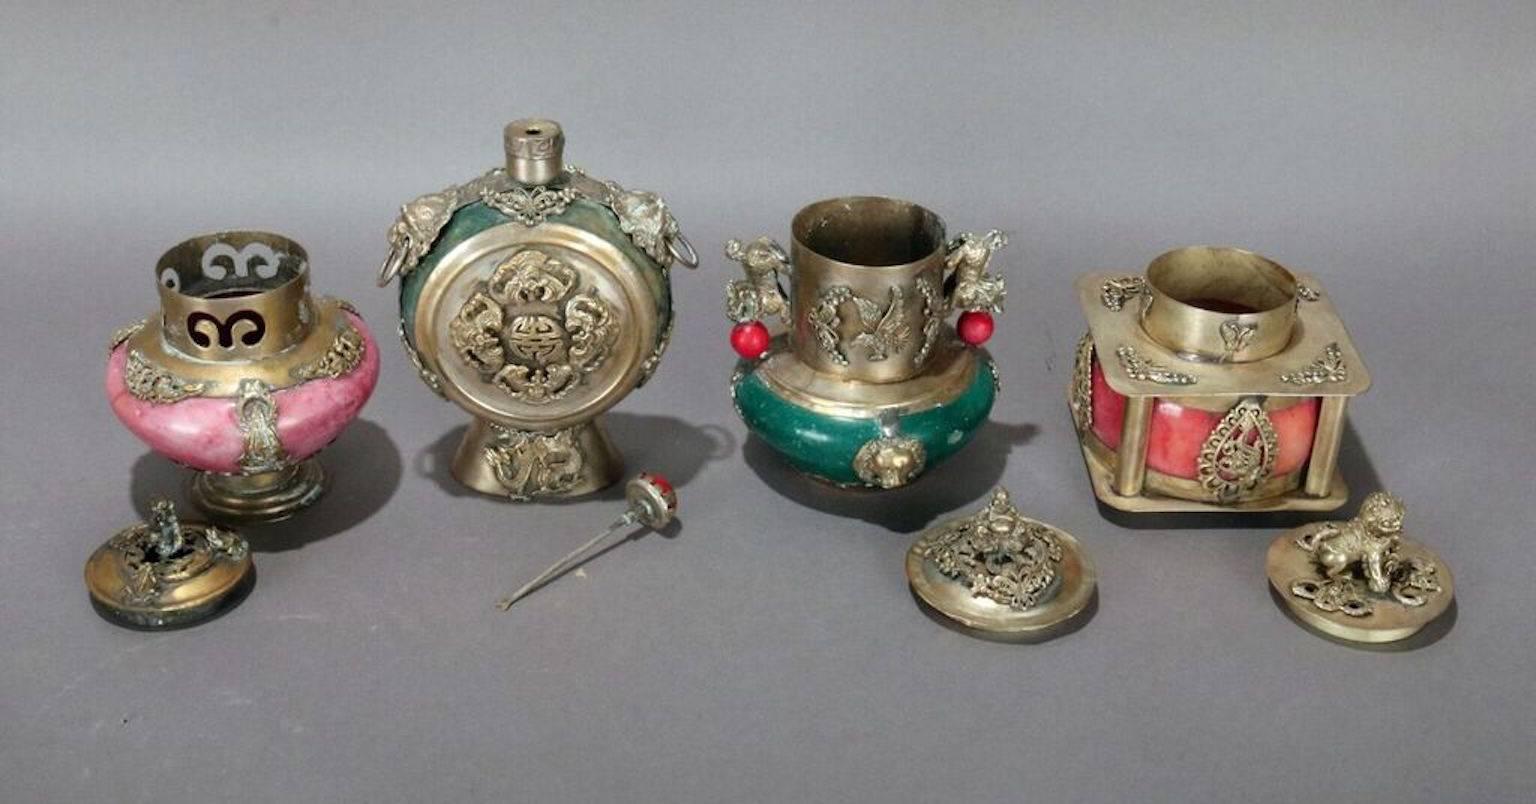 Set of four antique Chinese hard stone scent bottles feature jeweled decoration of copper alloy treated with a silver wash, early 20th century.